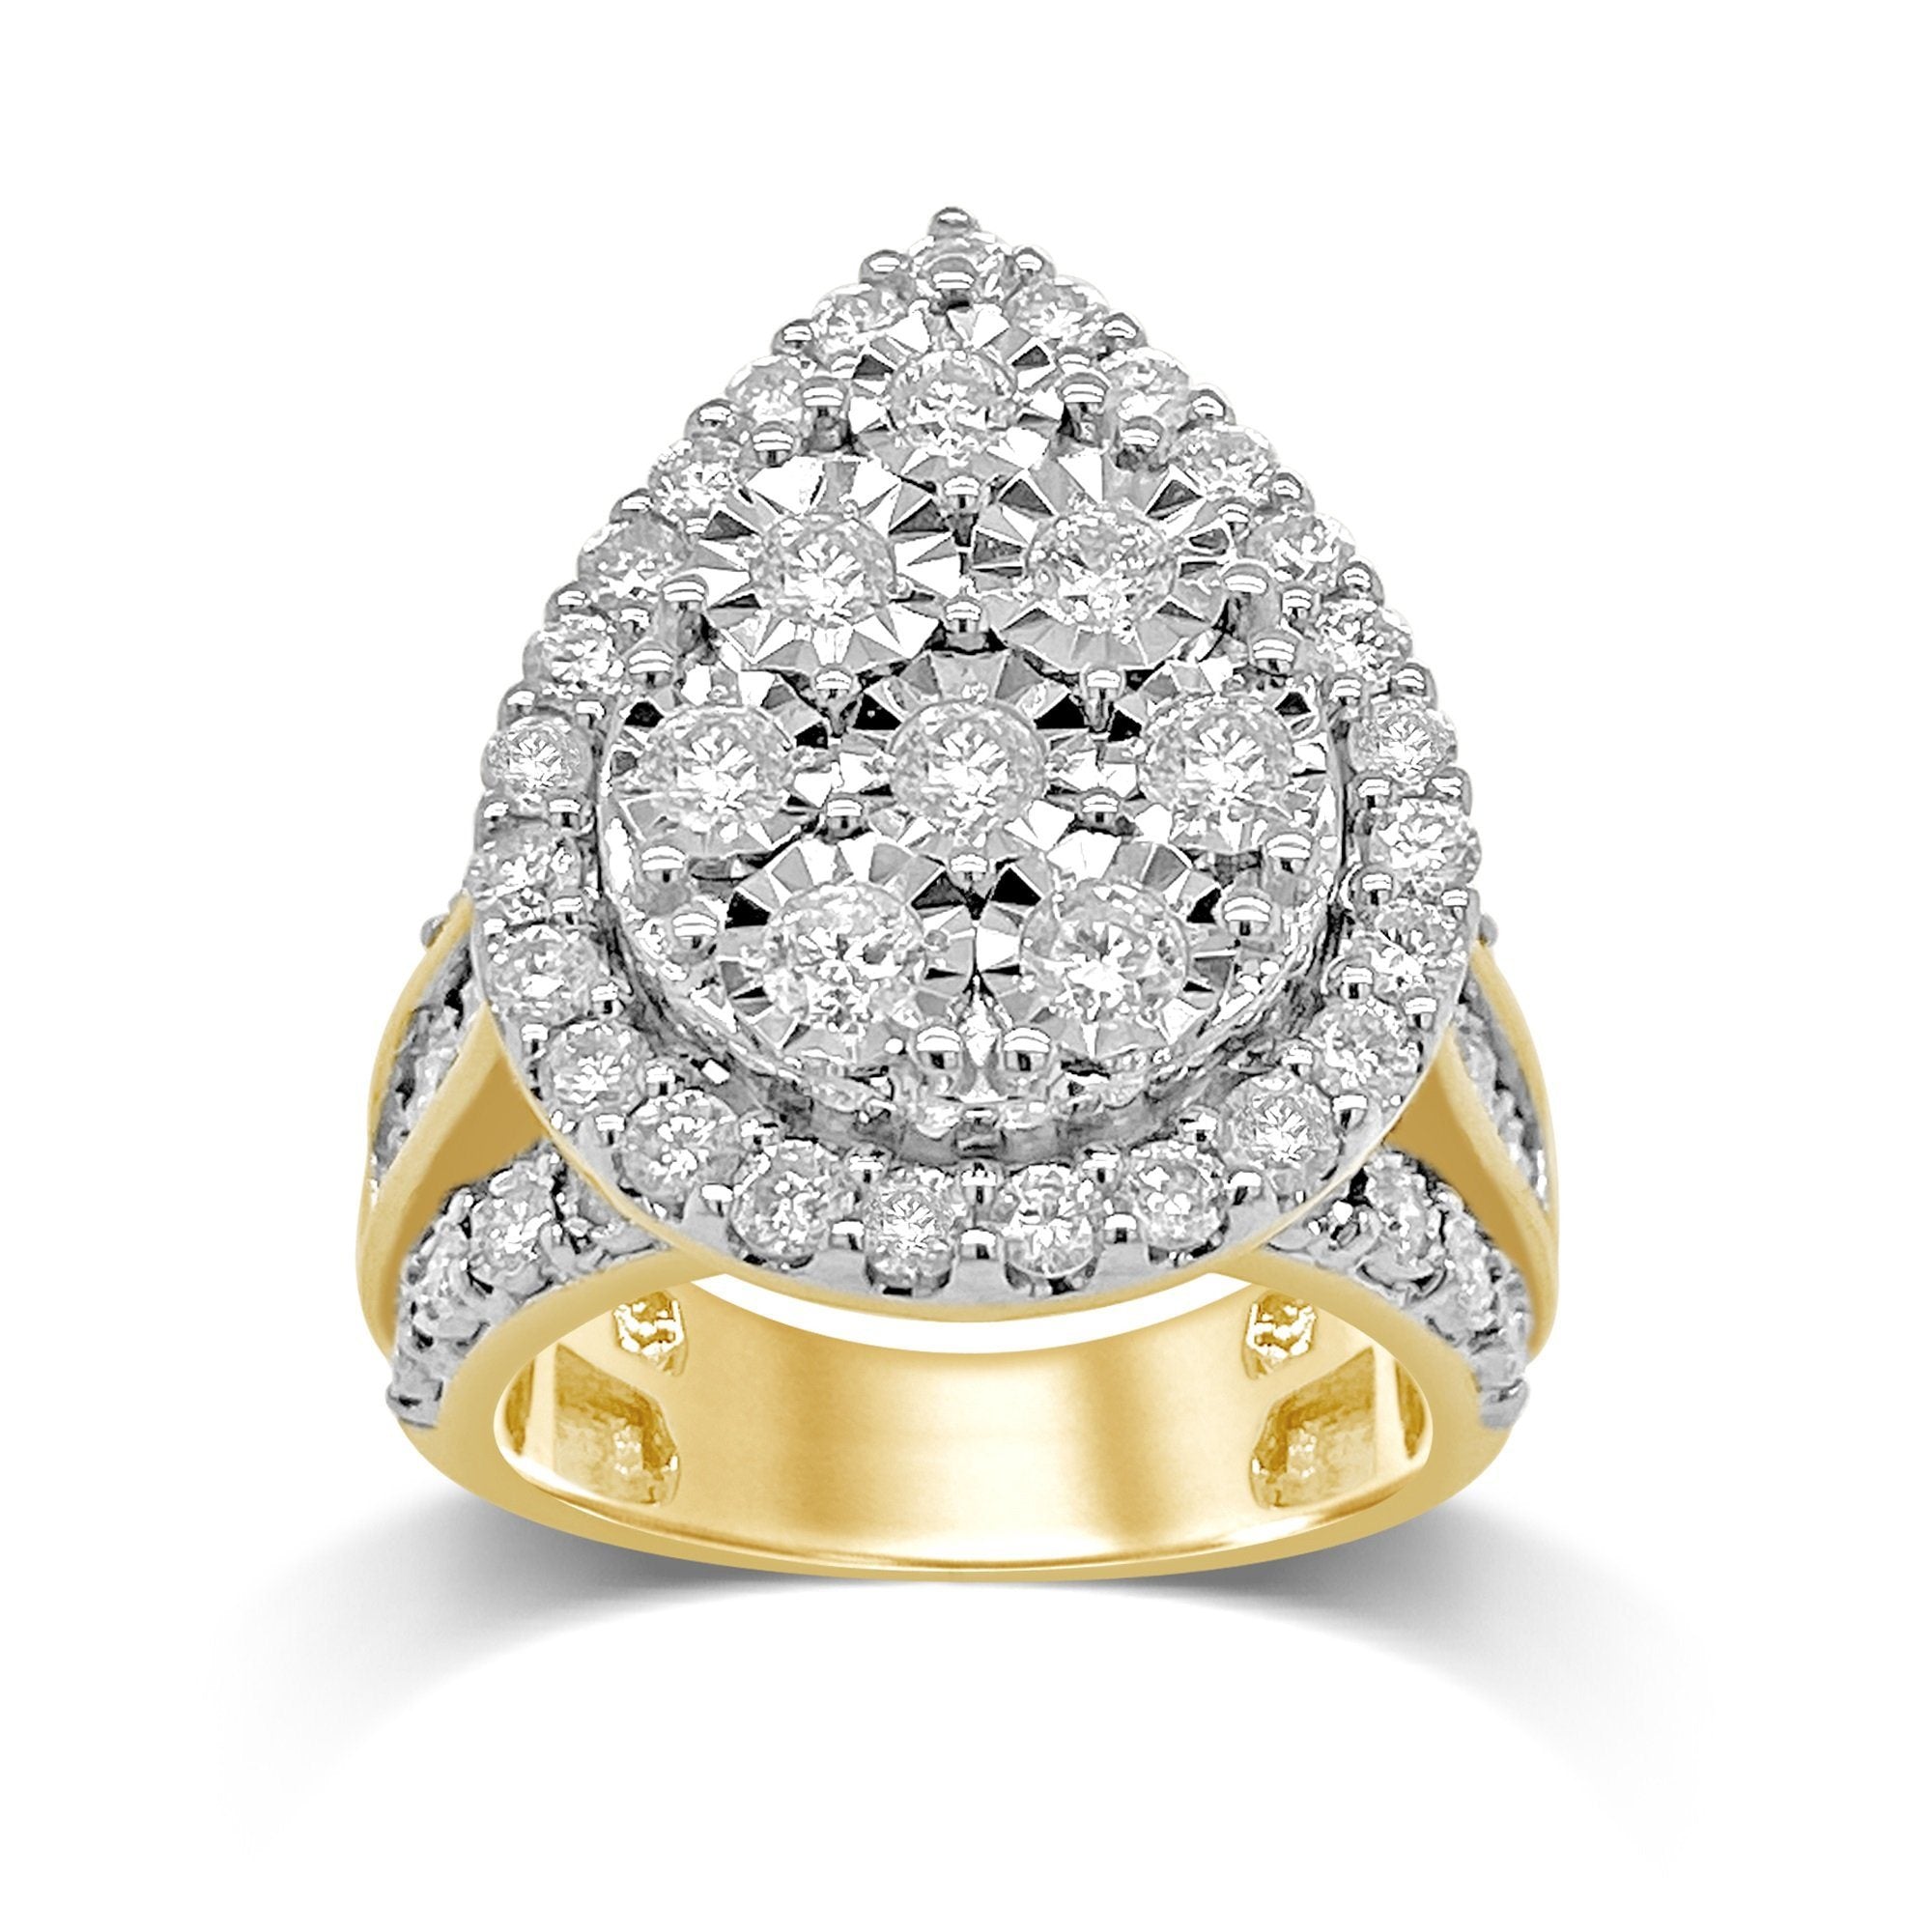 Miracle Halo Pear Ring with 2.00ct of Diamonds in 9ct Yellow Gold Rings Bevilles 